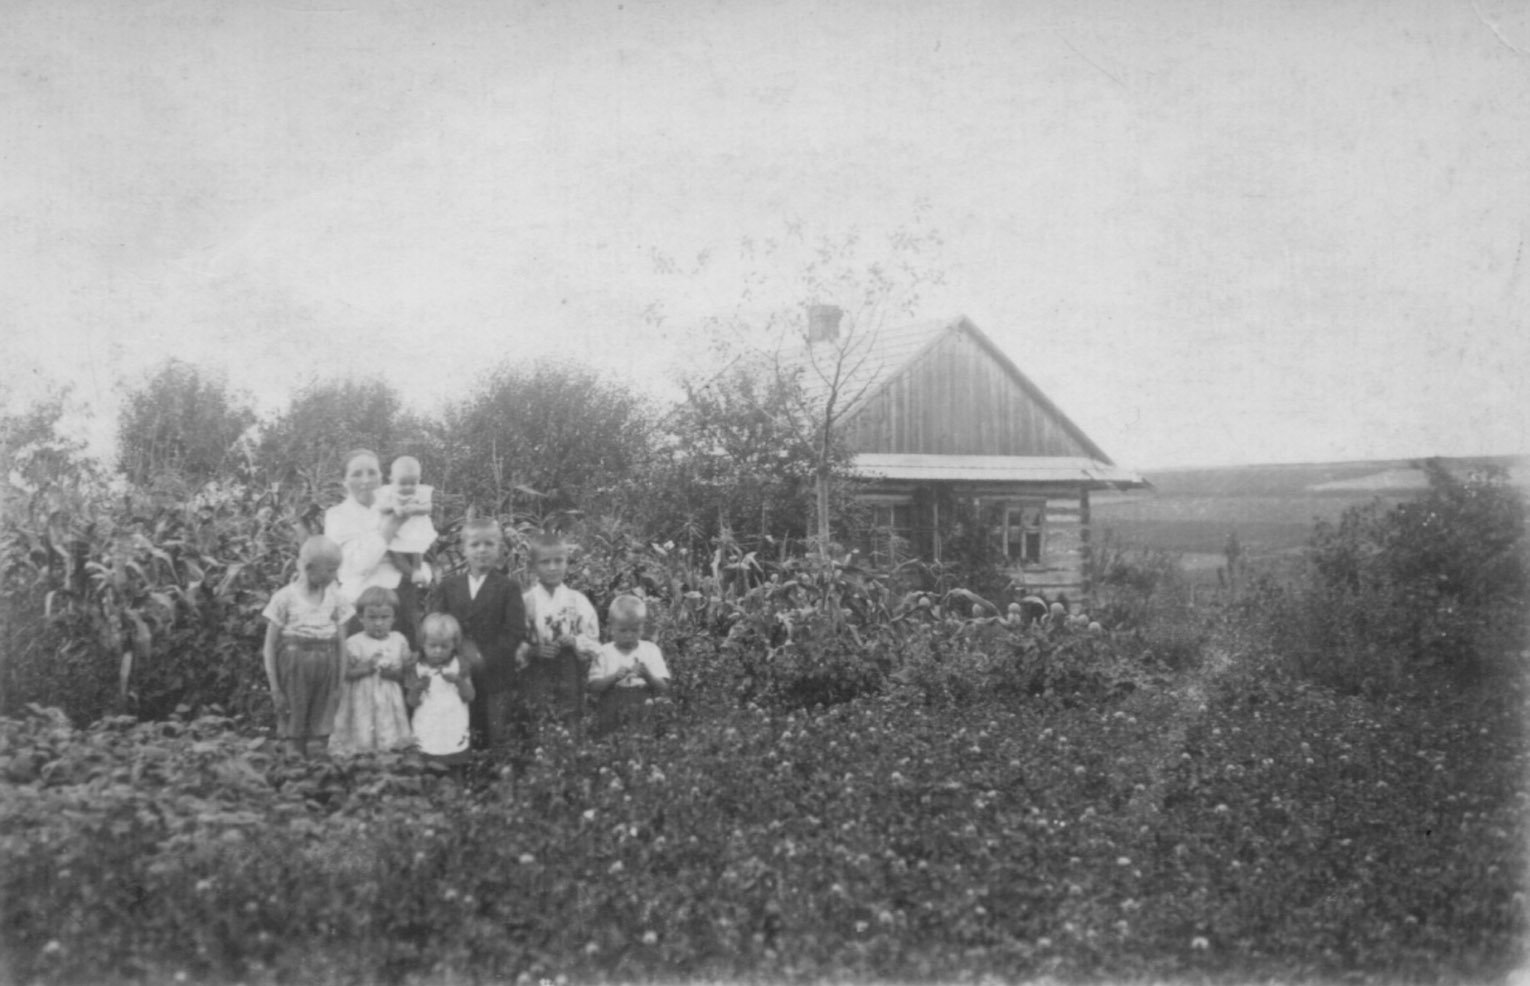 Wiktoria Ulma is pictured in an undated photo with three of her children and the children of relatives outside the Ulma home in Markowa, a village in southeastern Poland. Wikotria, her husband, Józef, and their seven children were executed March 24, 1944, by Nazis who discovered that the family had been sheltering eight Jews who had escaped internment by German occupying forces. Ulma girls Stasia and Basia are pictured in the middle near their mother, who is holding son Wlodzimierz. (CNS photo courtesy National Remembrance Institute)